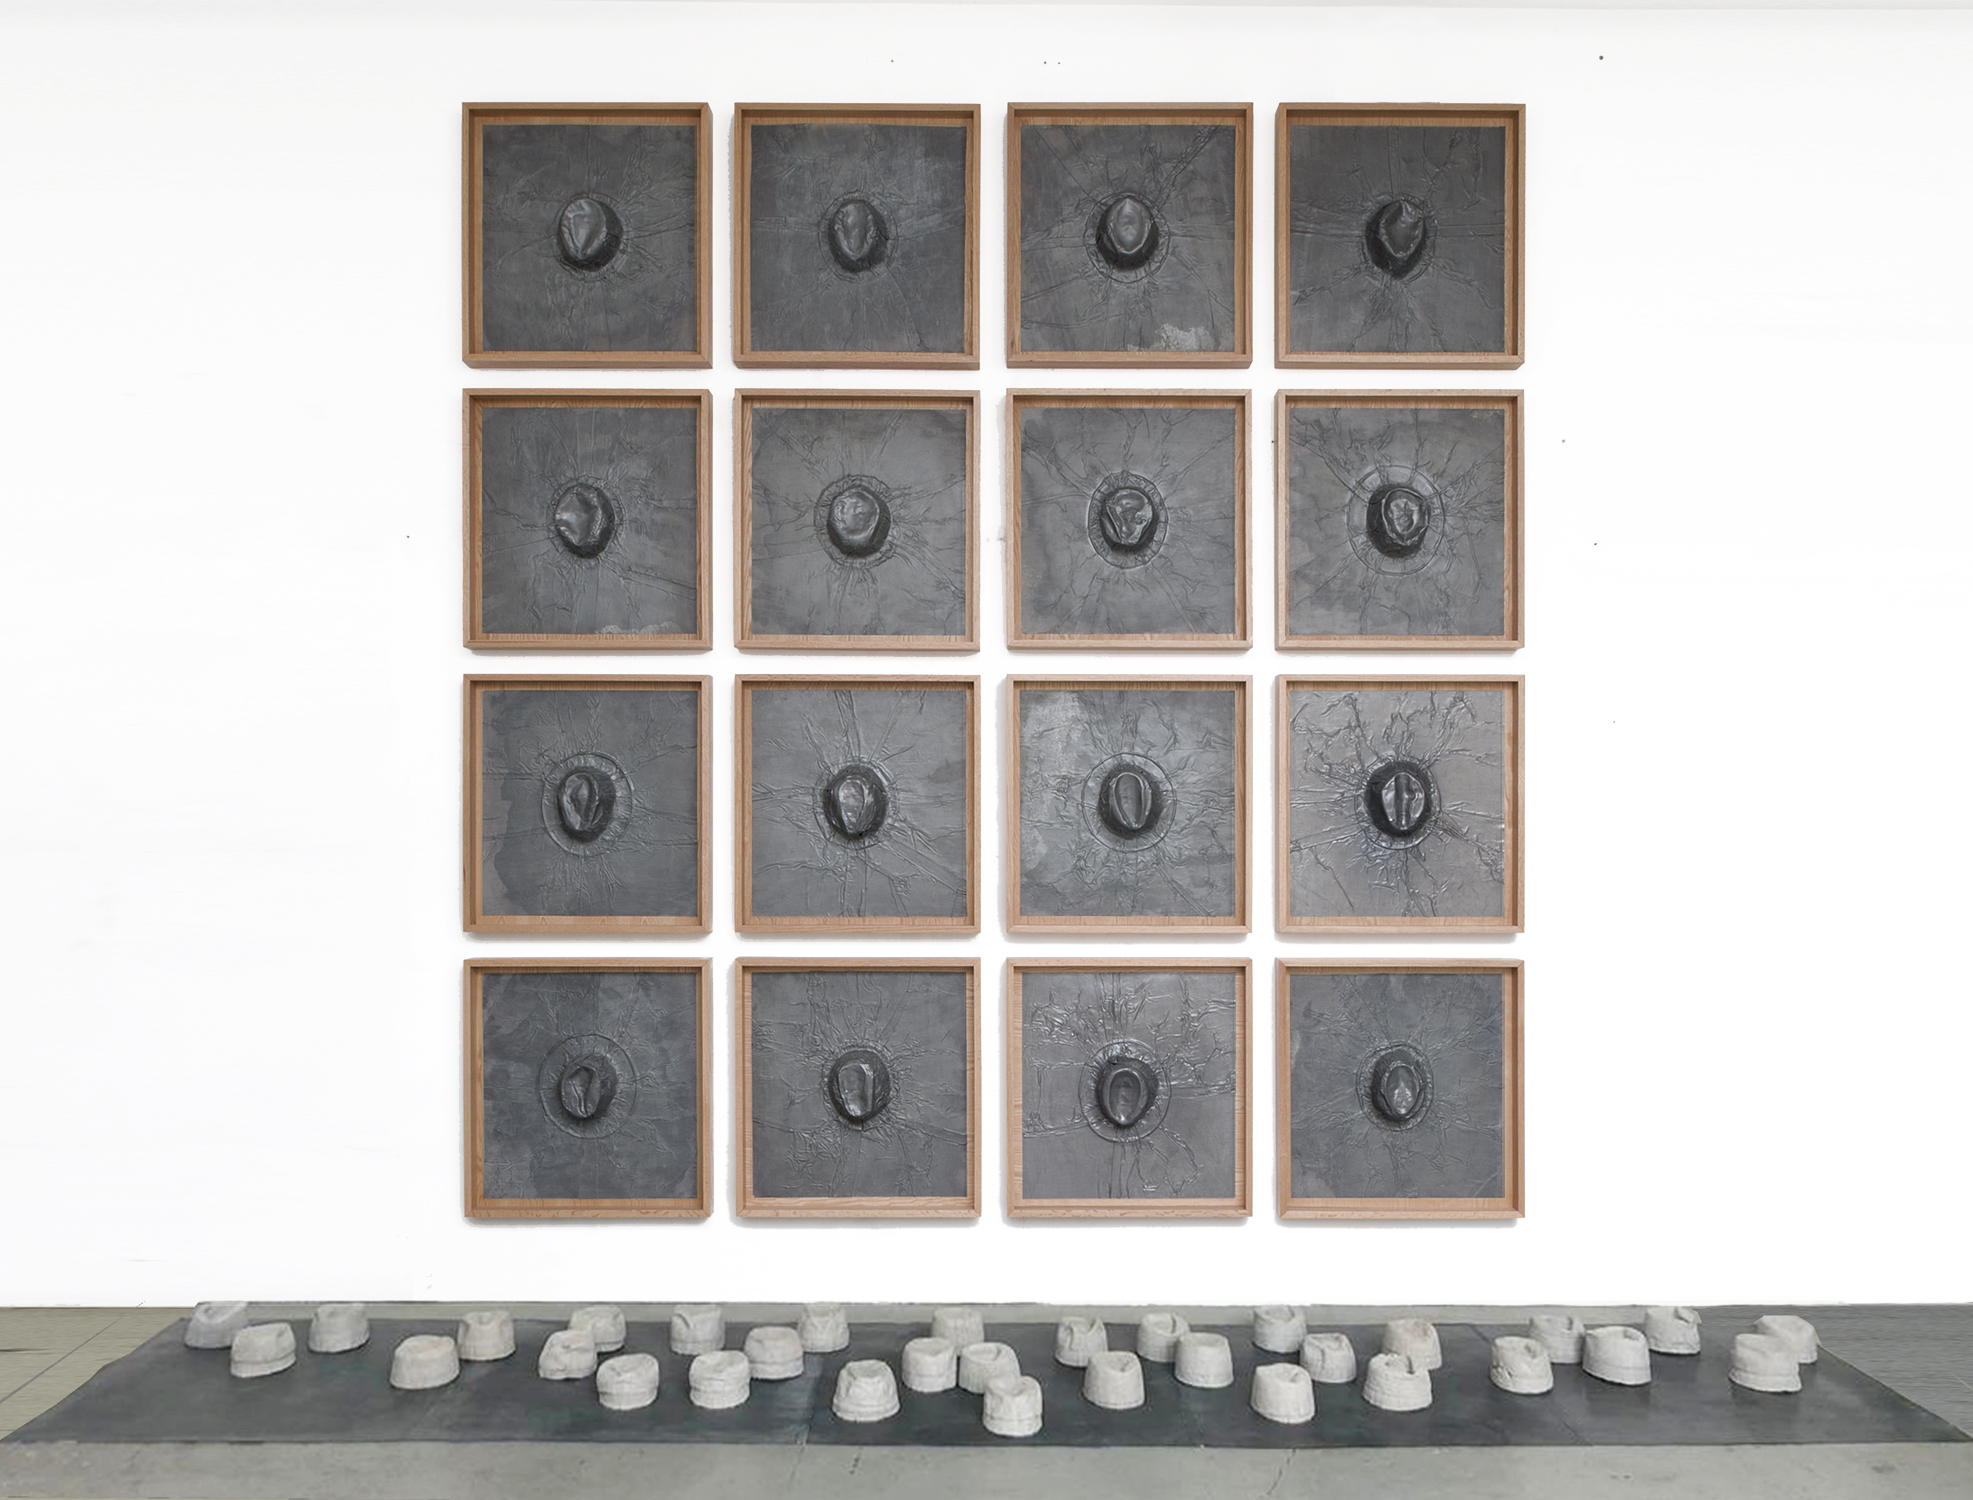  Gray Matter, 2019  16 Hats Belonging to My Father (1905-1978) Embossed in Lead, and 32 Concrete Casts of the Inside of the Hats   197” x 157” x 48”    Materia Gris, 2019   16 Sombreros de Mi Padre (1905 – 1978) Repujados en Plomo y 32 Moldes de Conc